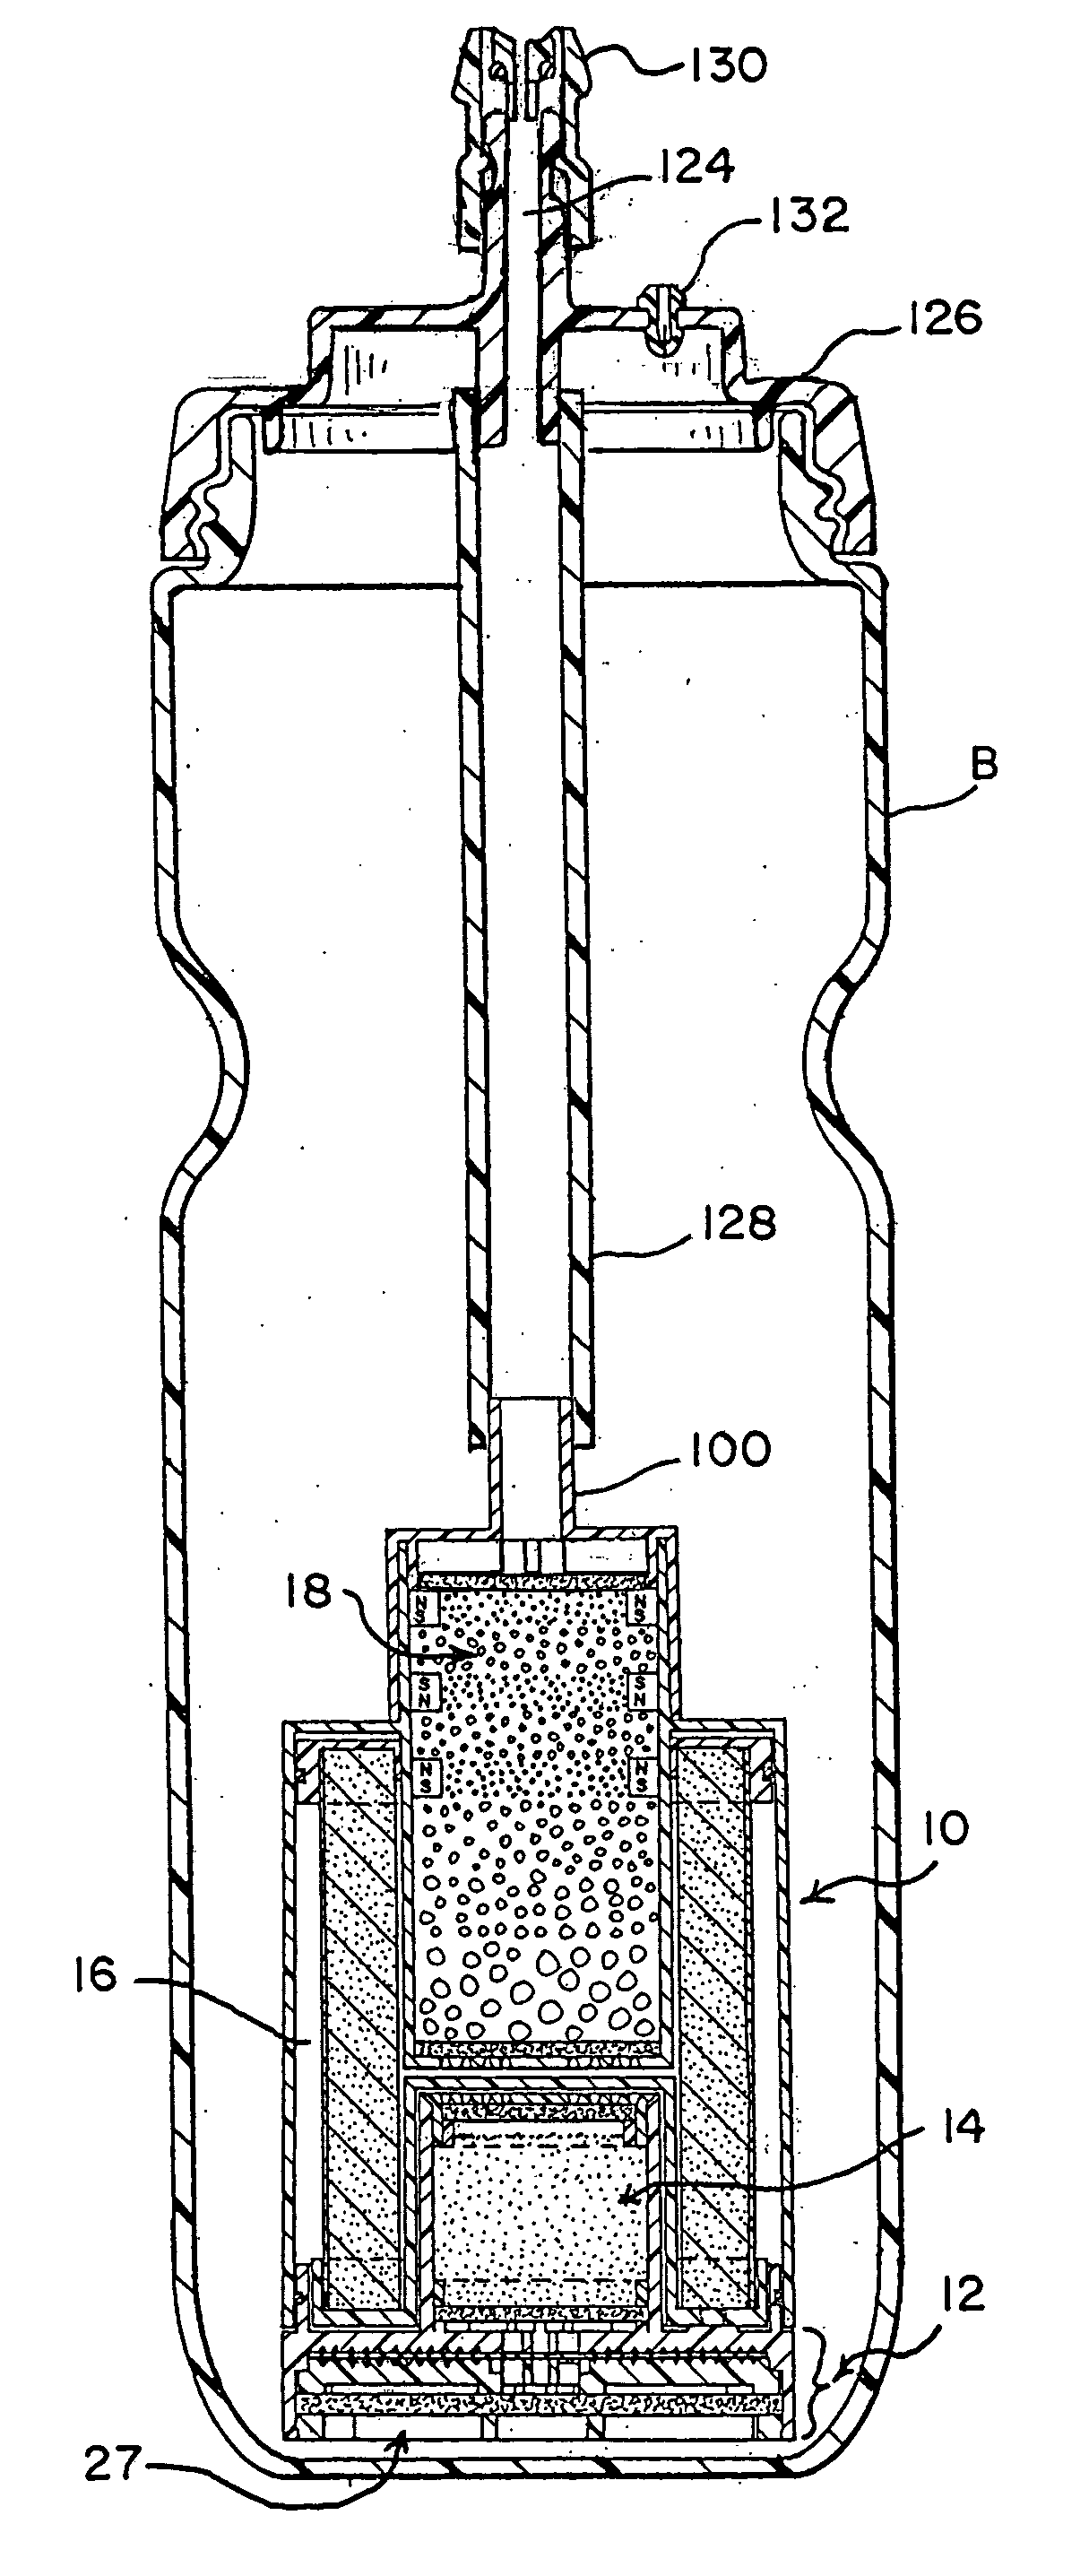 Water treatment unit for bottle or pitcher